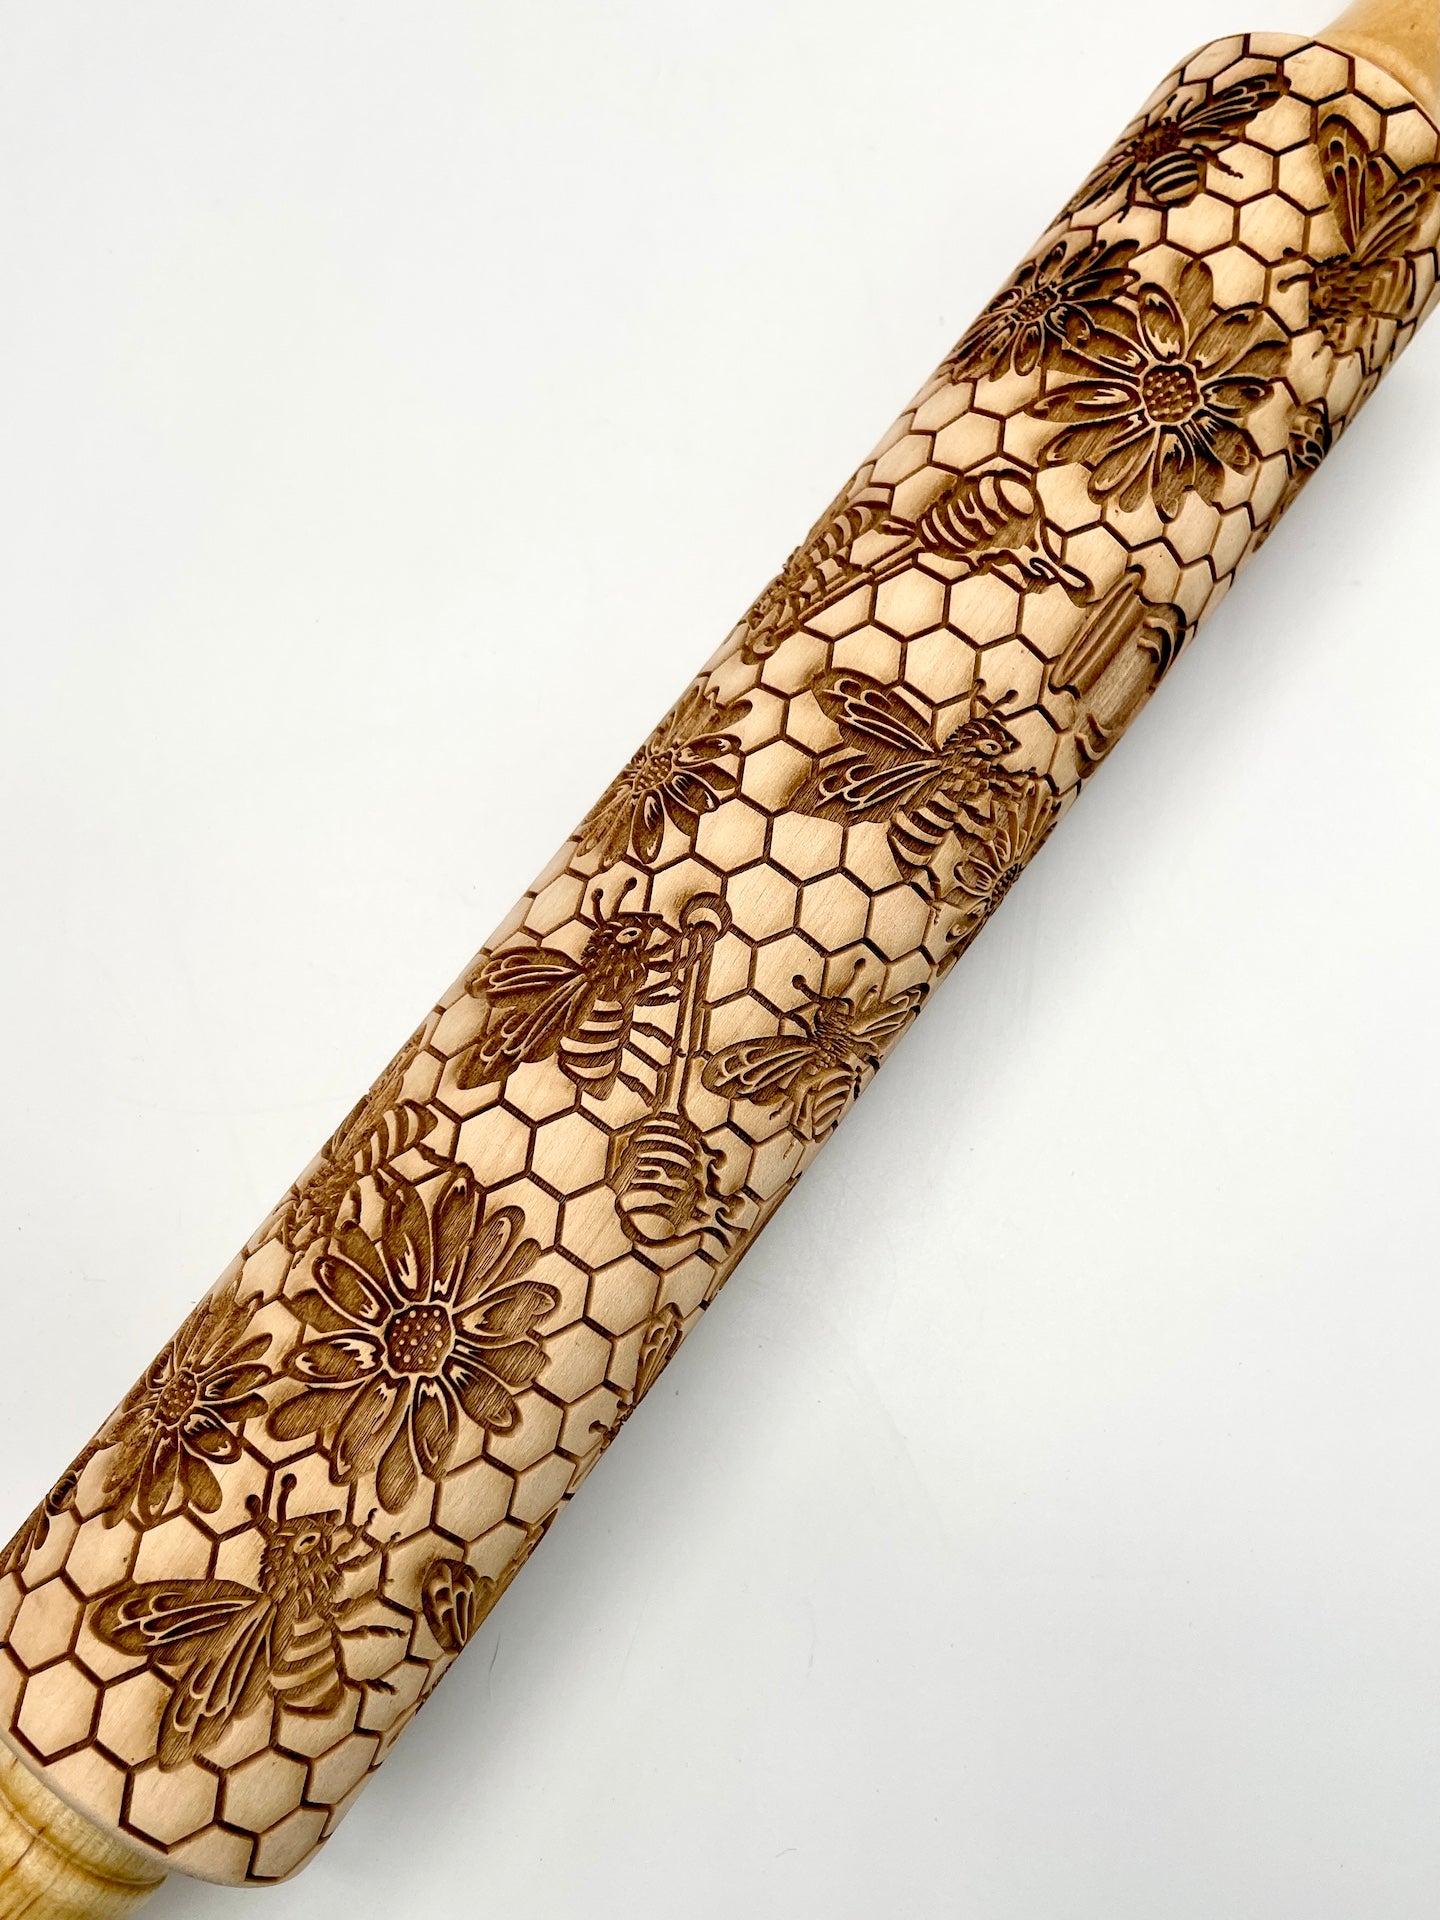 Honey Bees Textured Rolling Pin